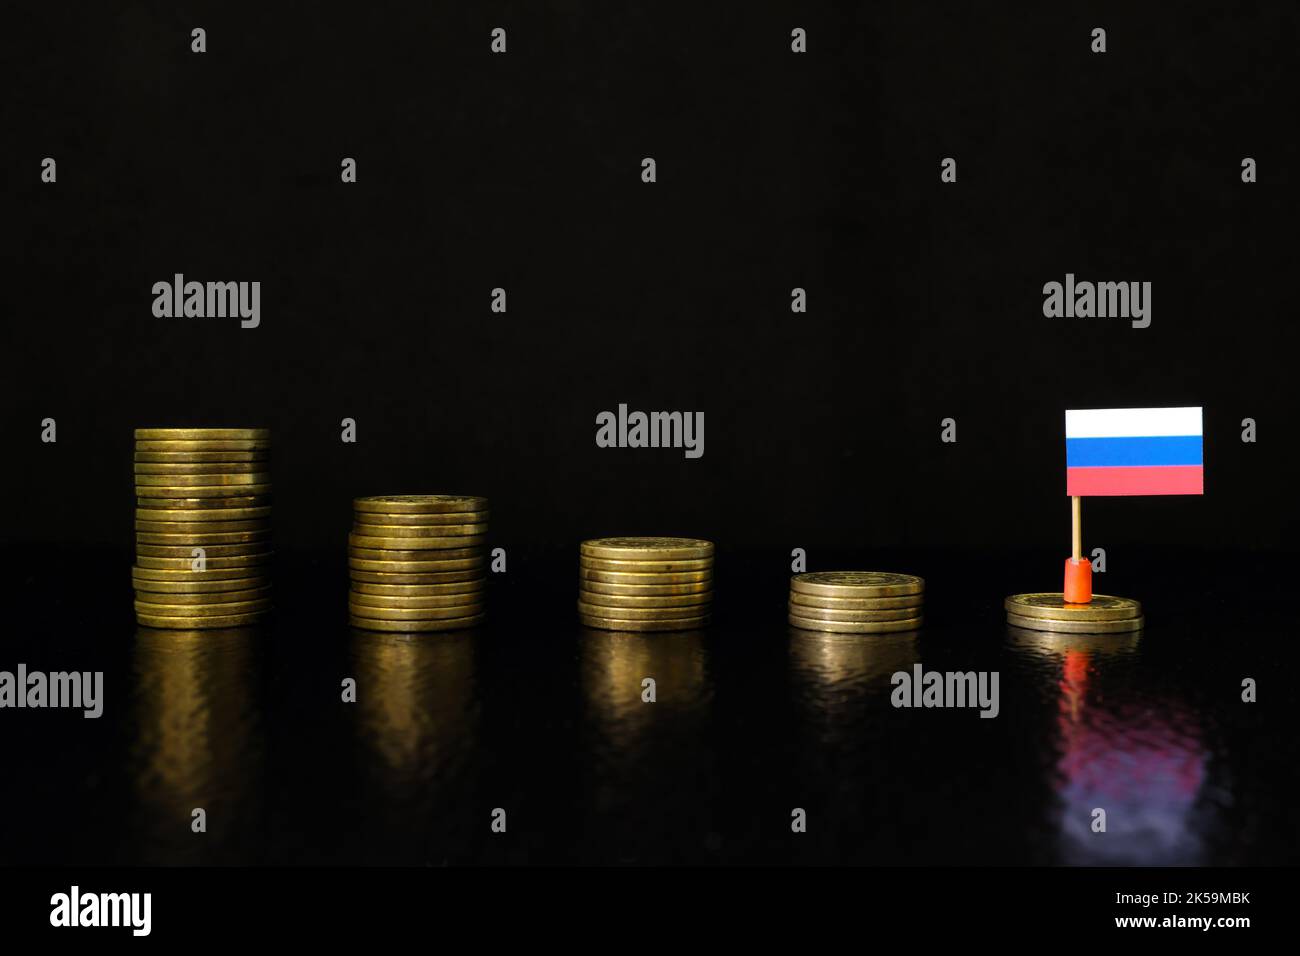 Russia economic recession, financial crisis and currency depreciation concept. Russian flag in decreasing stack of coins in dark black background. Stock Photo